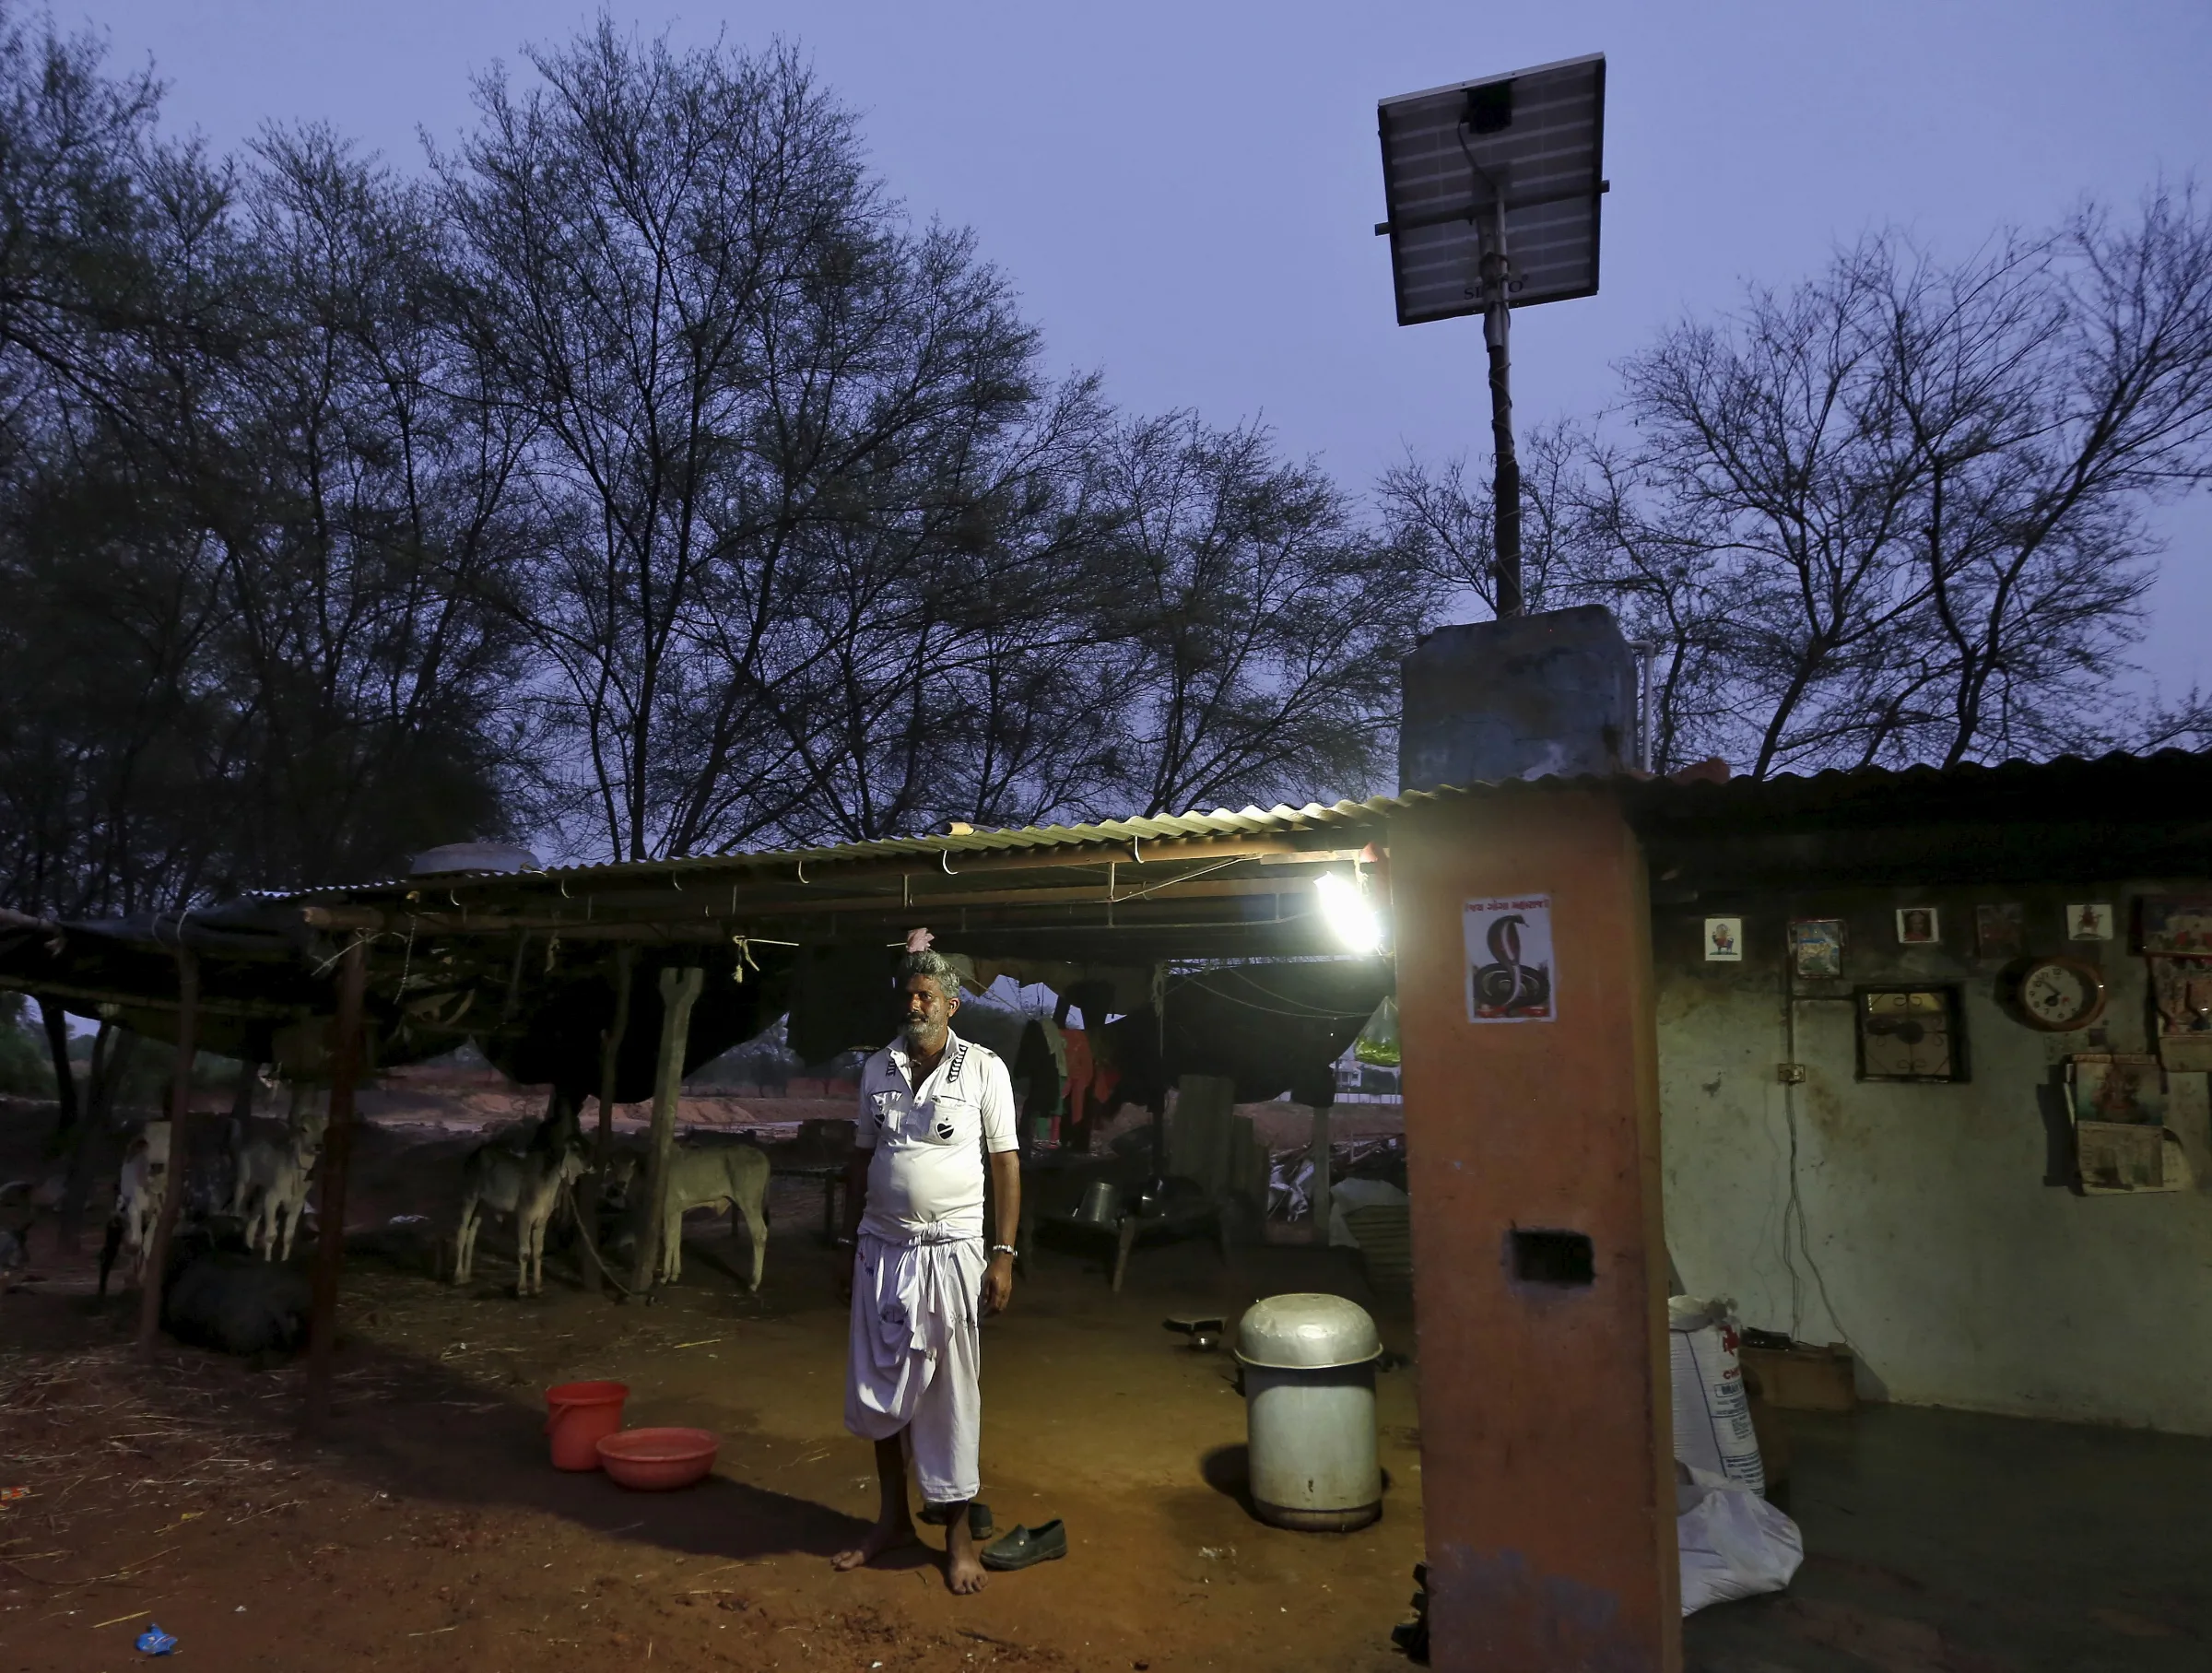 Villager Mohan Bharwad poses next to a Compact Fluorescent Lamp (CFL) powered by solar energy, outside his house on the outskirts of Gandhinagar, India, June 25, 2015